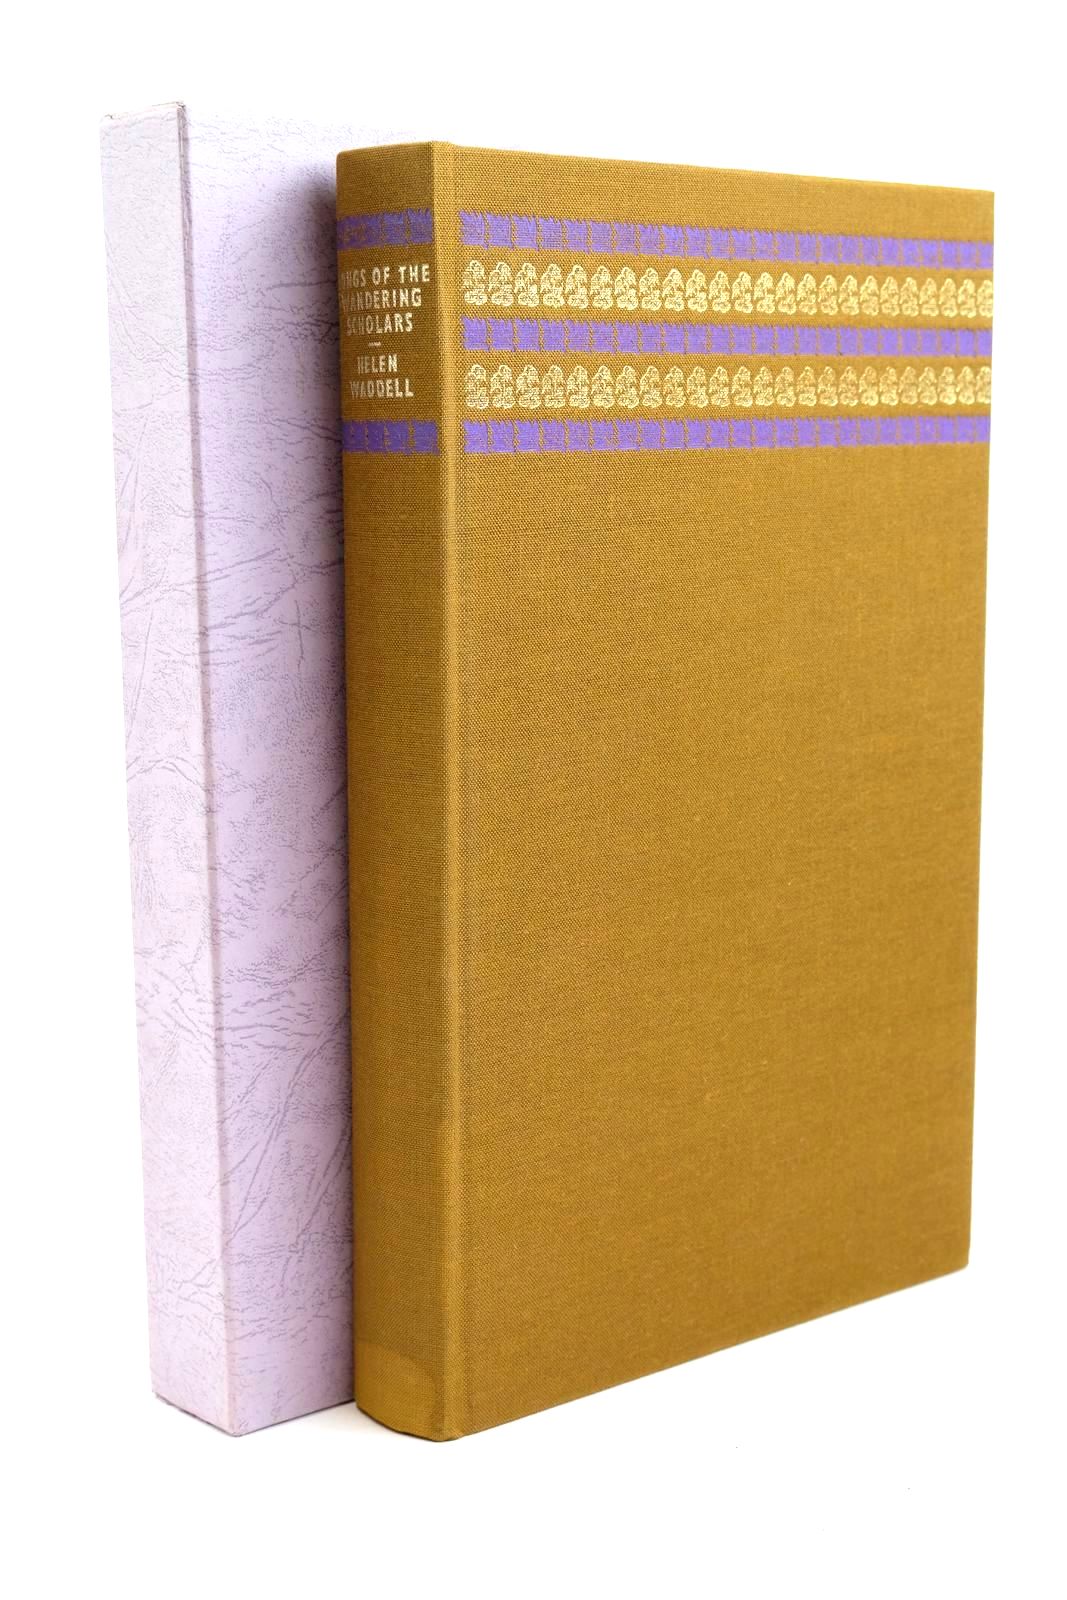 Photo of SONGS OF THE WANDERING SCHOLARS written by Waddell, Helen Corrigan, Dame F. illustrated by Freeman, Joan published by Folio Society (STOCK CODE: 1321554)  for sale by Stella & Rose's Books